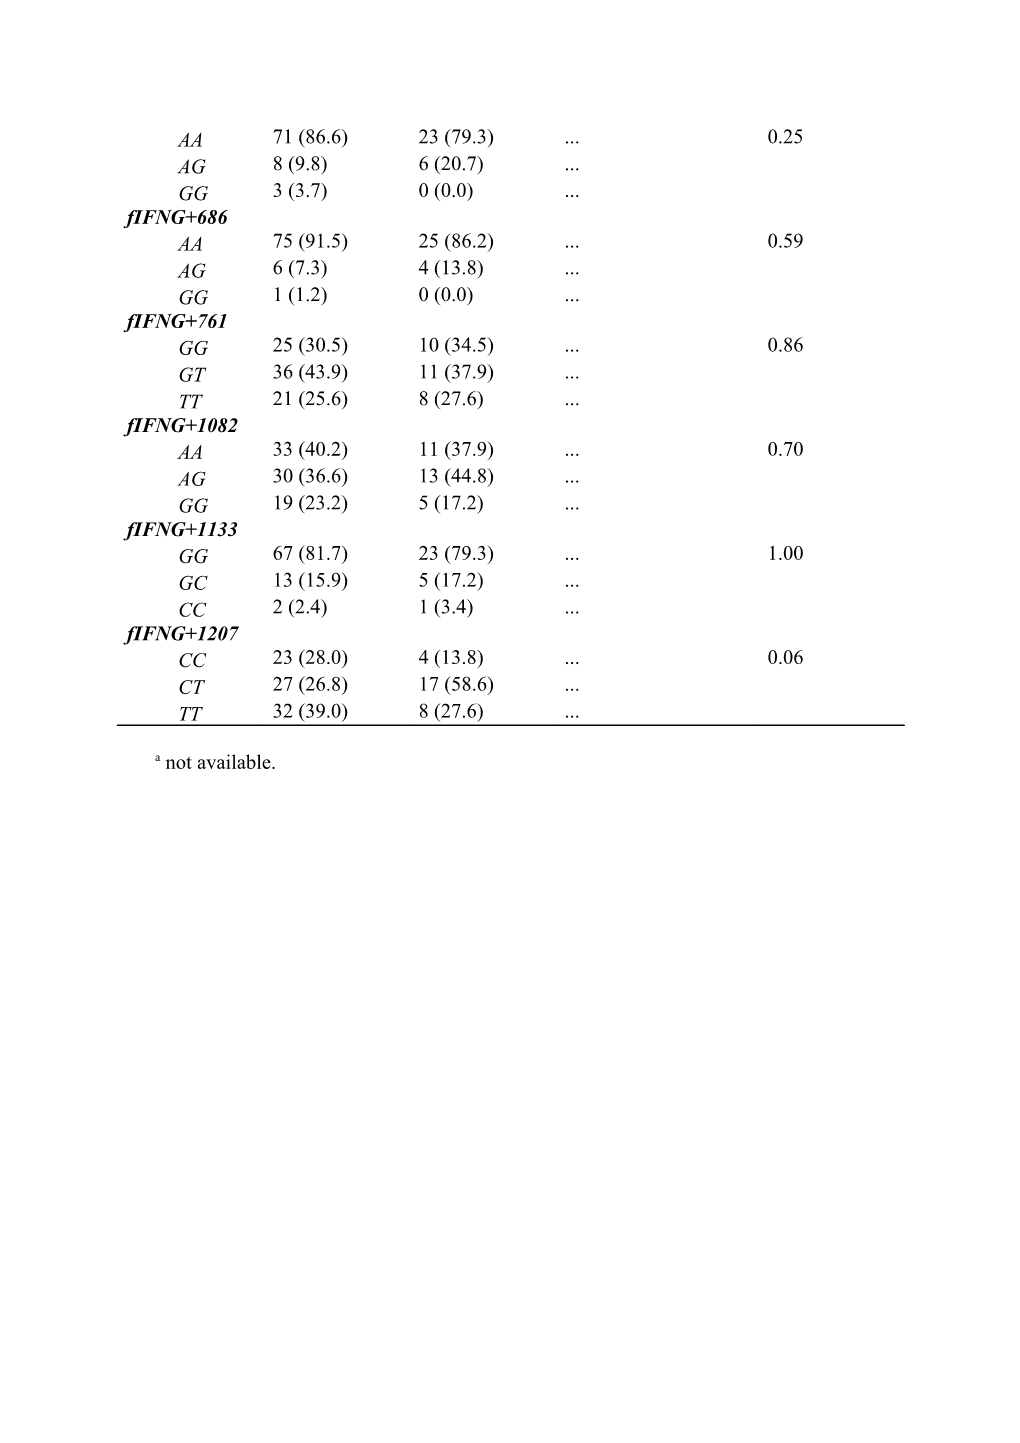 Additional File 3 Frequencies of Various Genotypes and Their Associations with the Outcomes